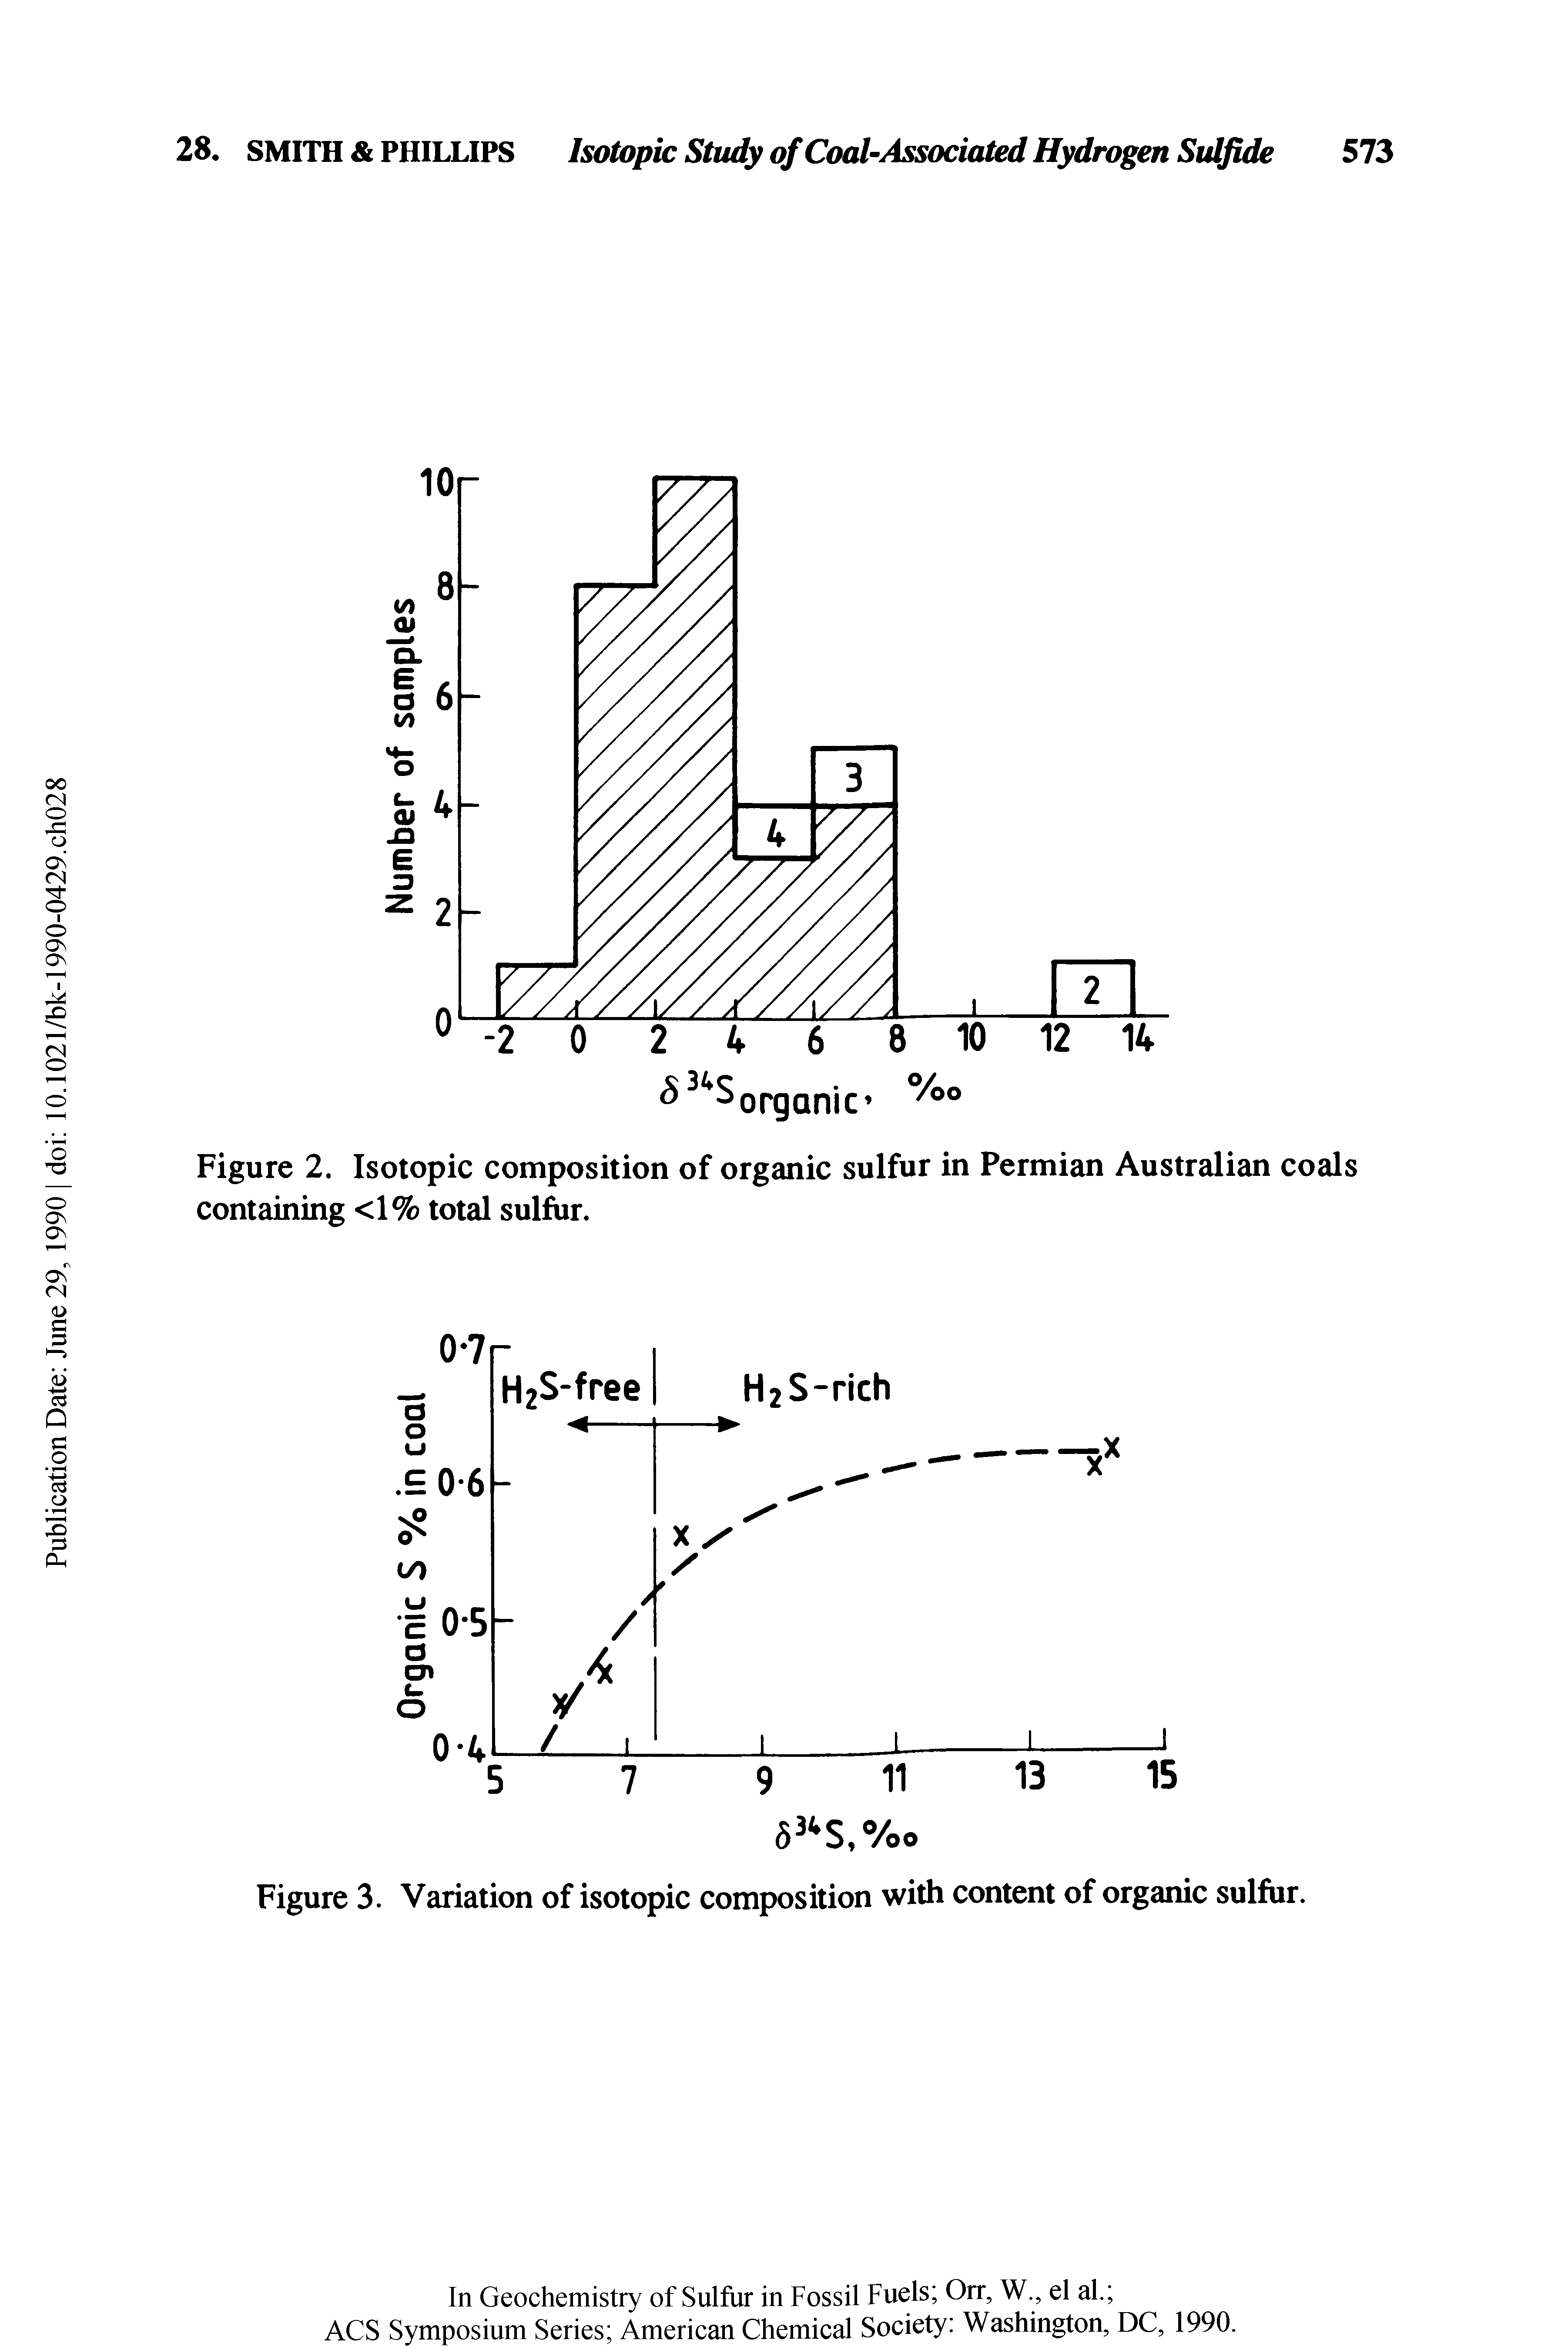 Figure 2. Isotopic composition of organic sulfur in Permian Australian coals containing <1% total sulfur.